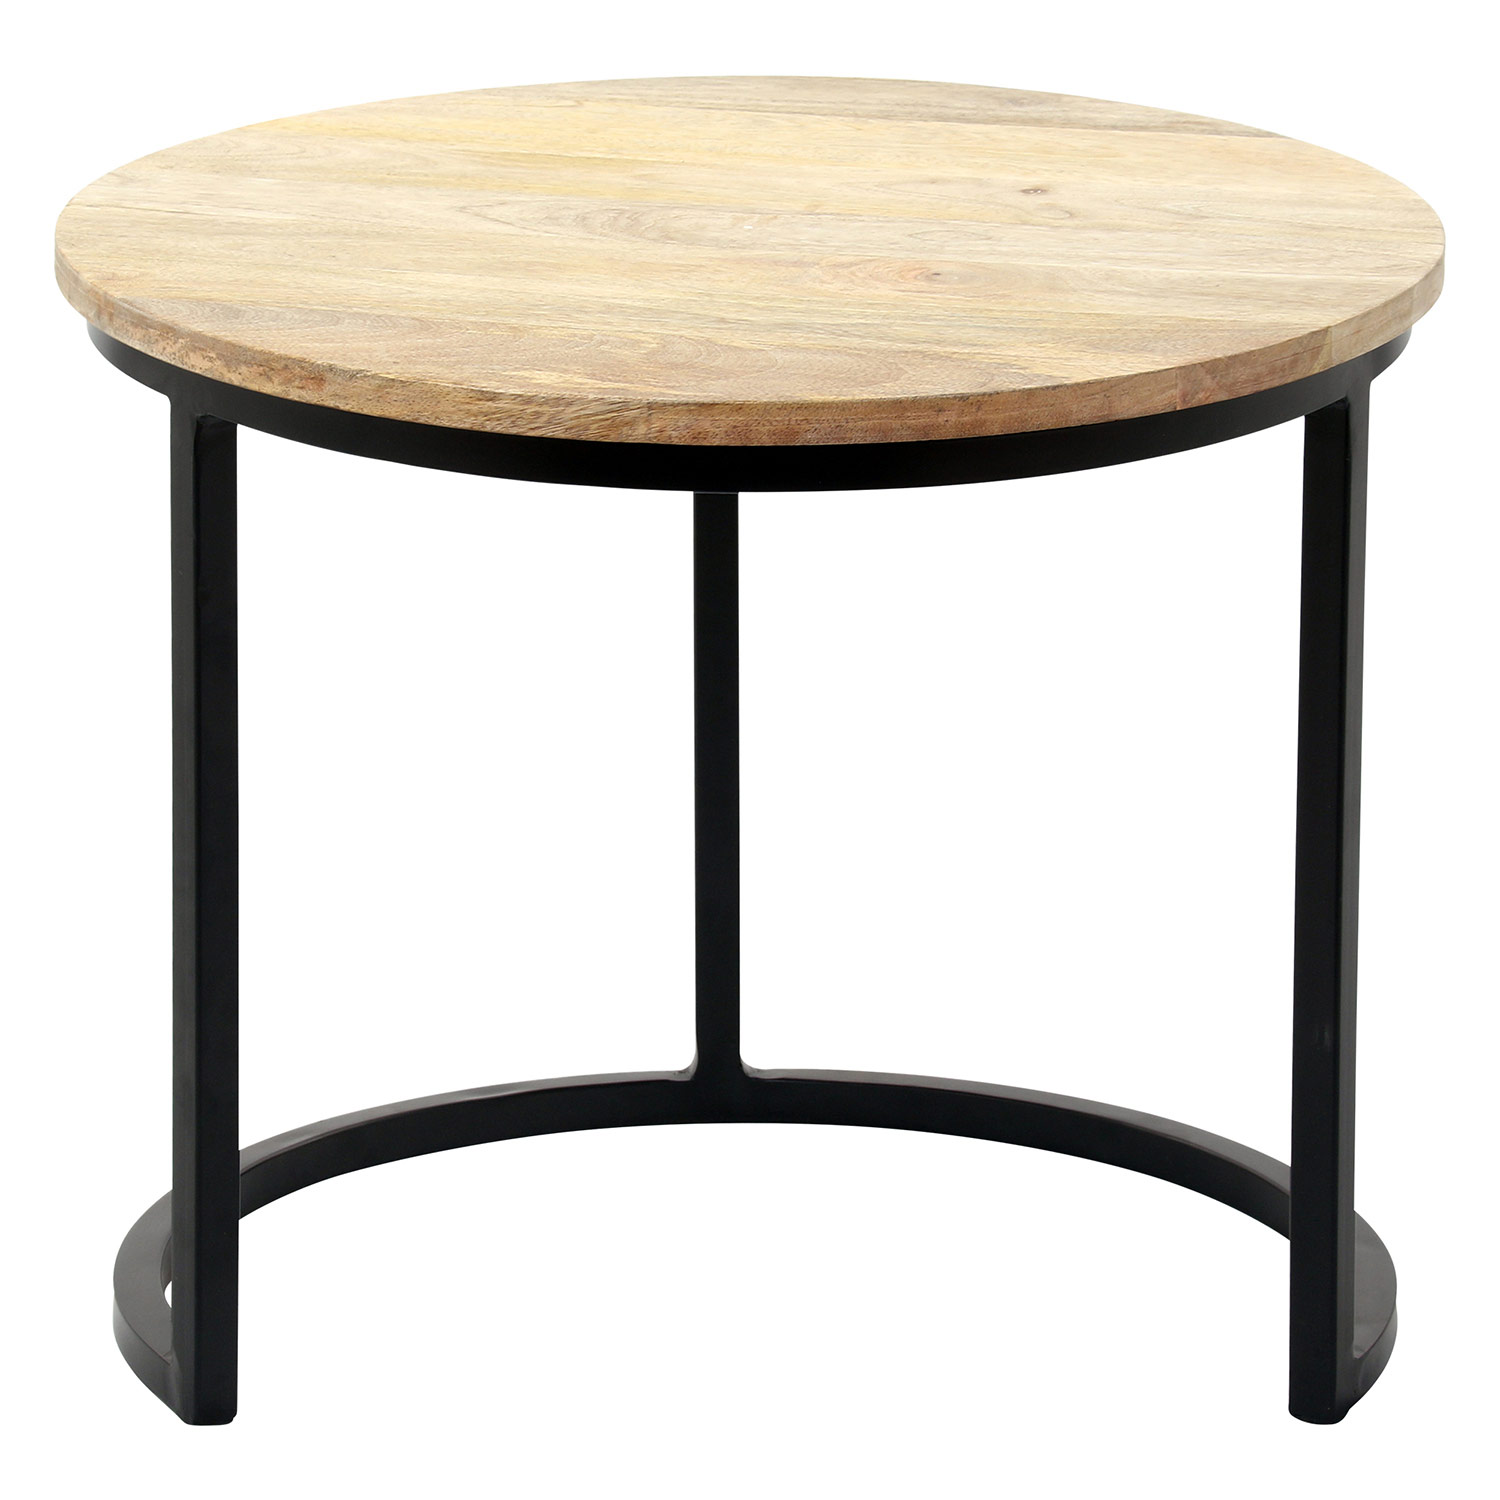 Ren-Wil Kindred Accent table - Natural/Black